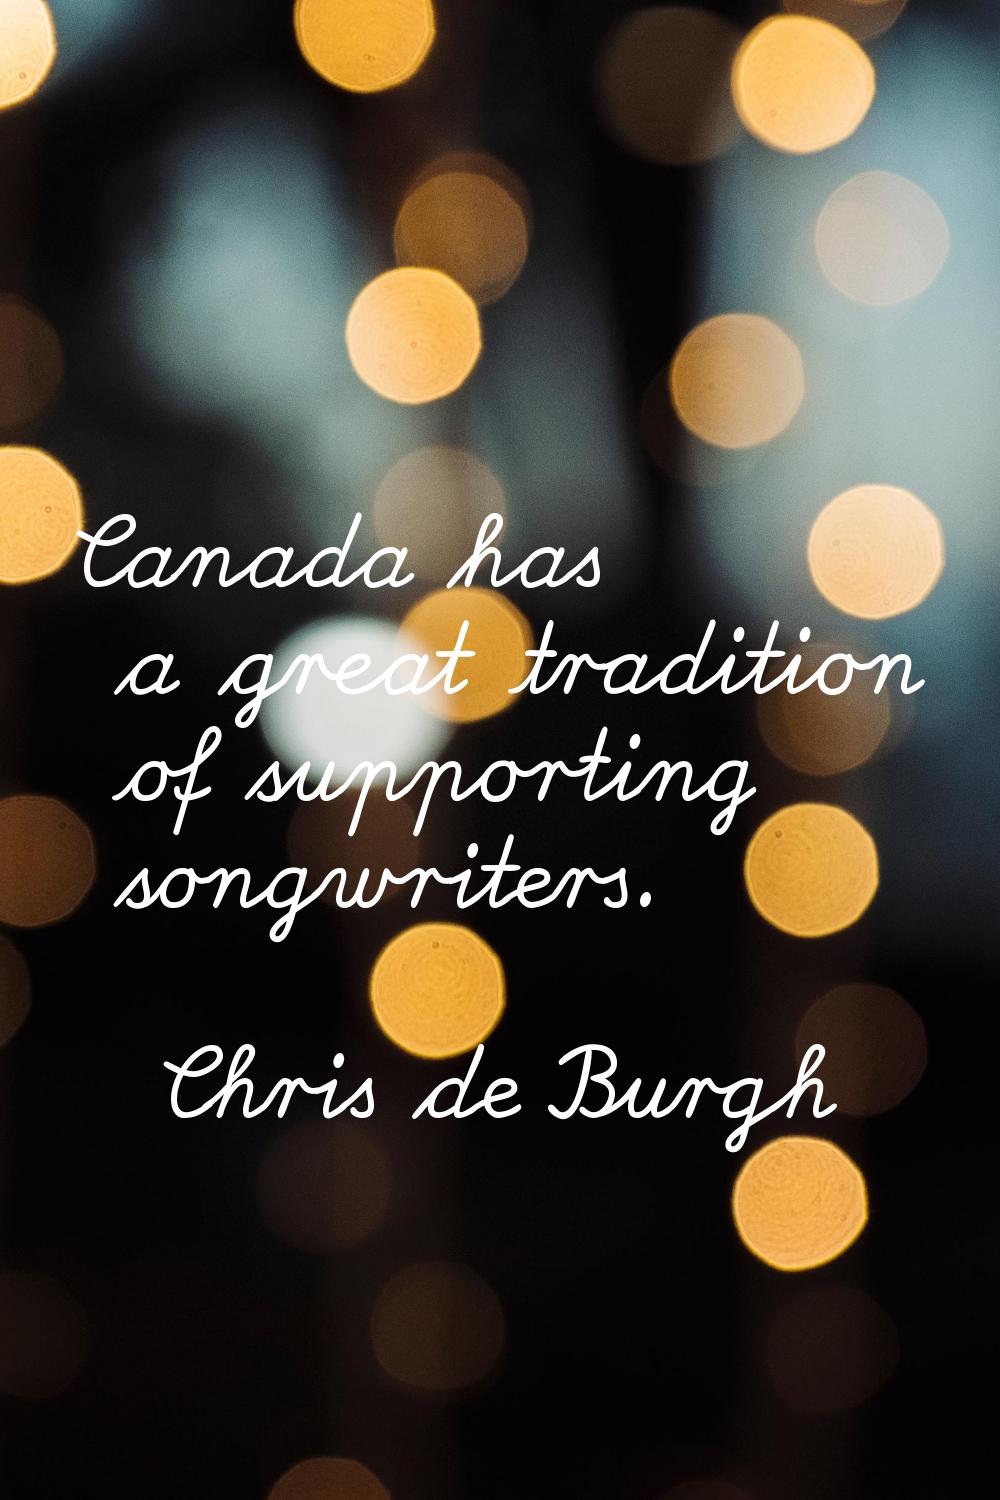 Canada has a great tradition of supporting songwriters.